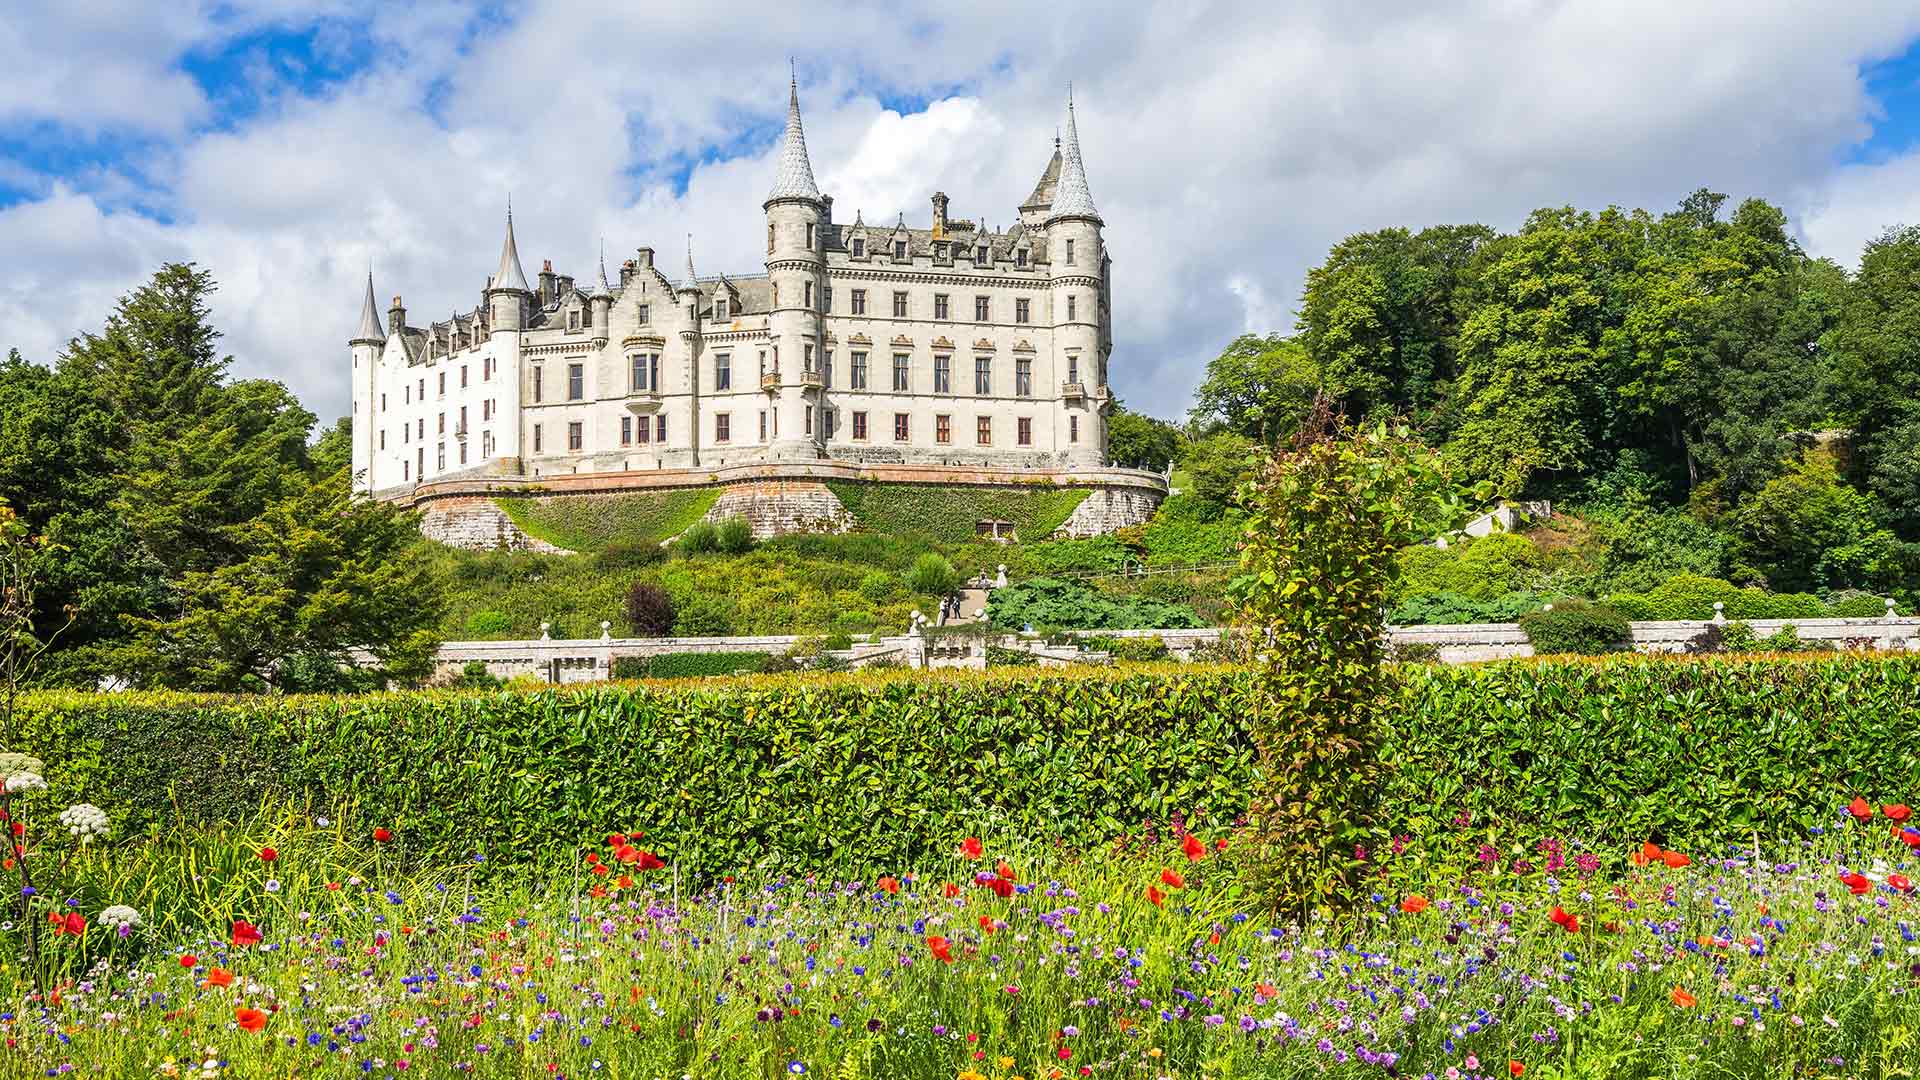 Grand, white Dunrobin Castle Scotland with blooming flowers and green grass